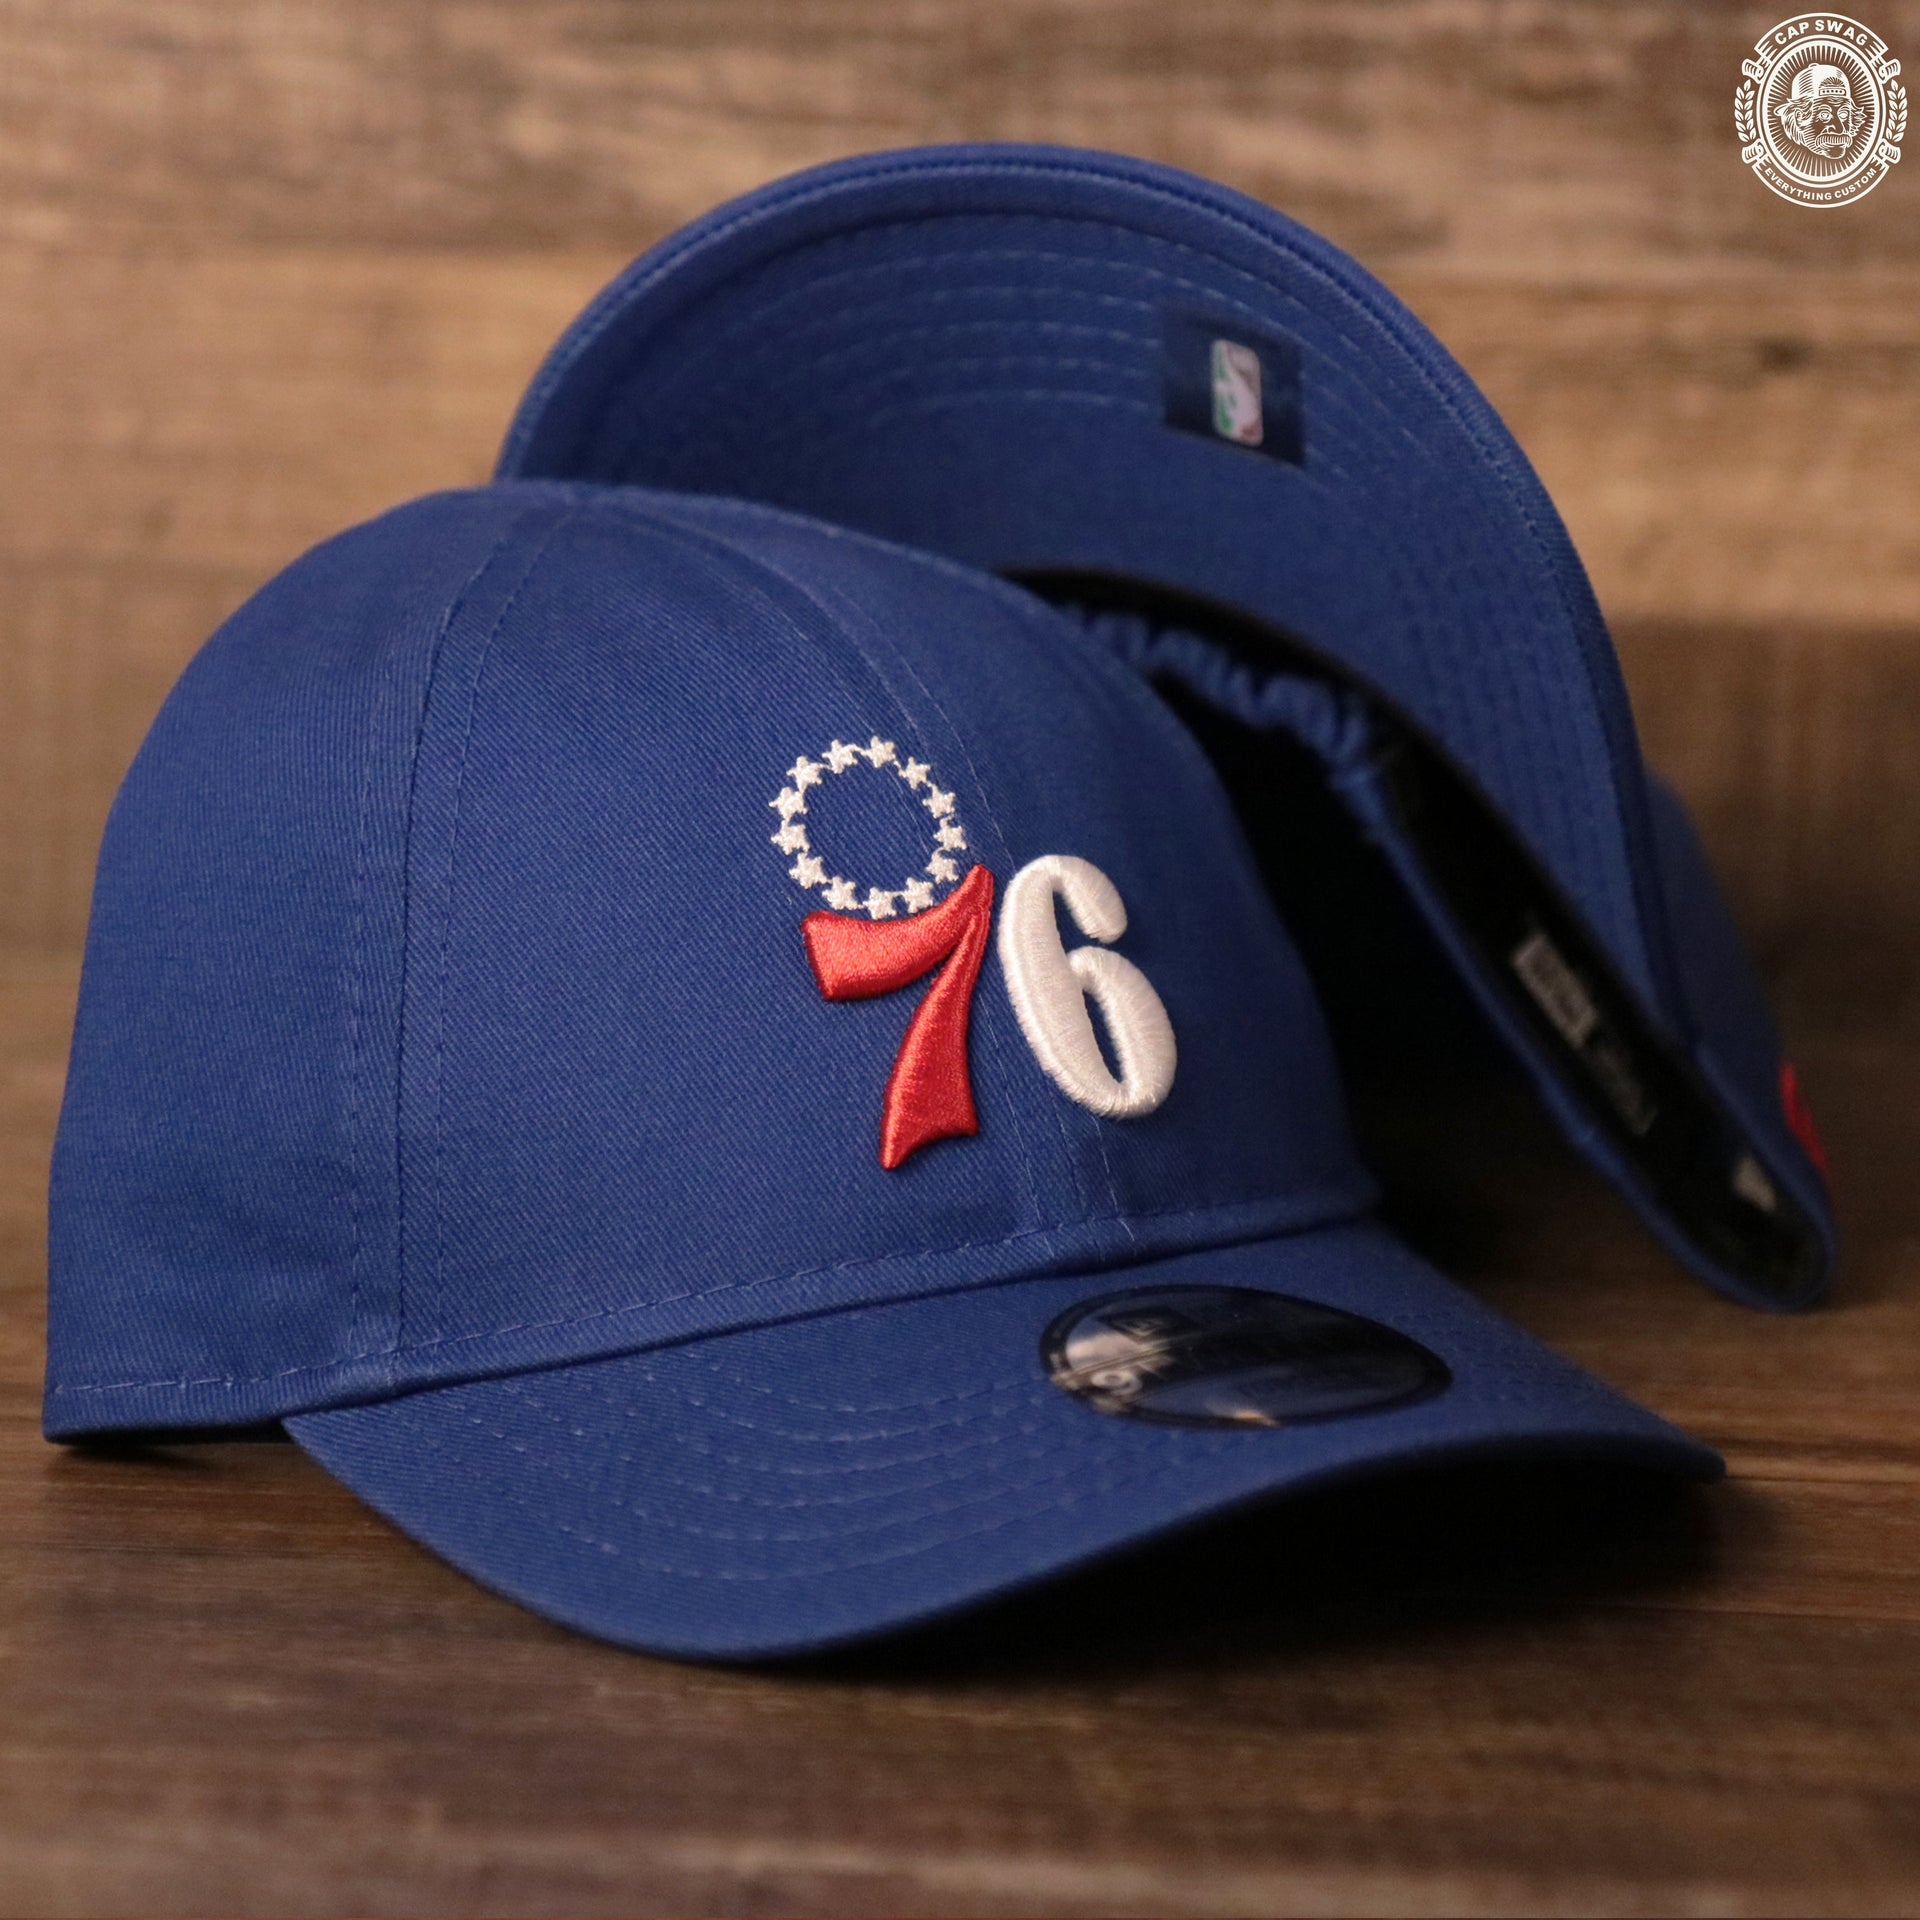 The royal blue Philadelphia 76ers toddler dad hat by New Era.